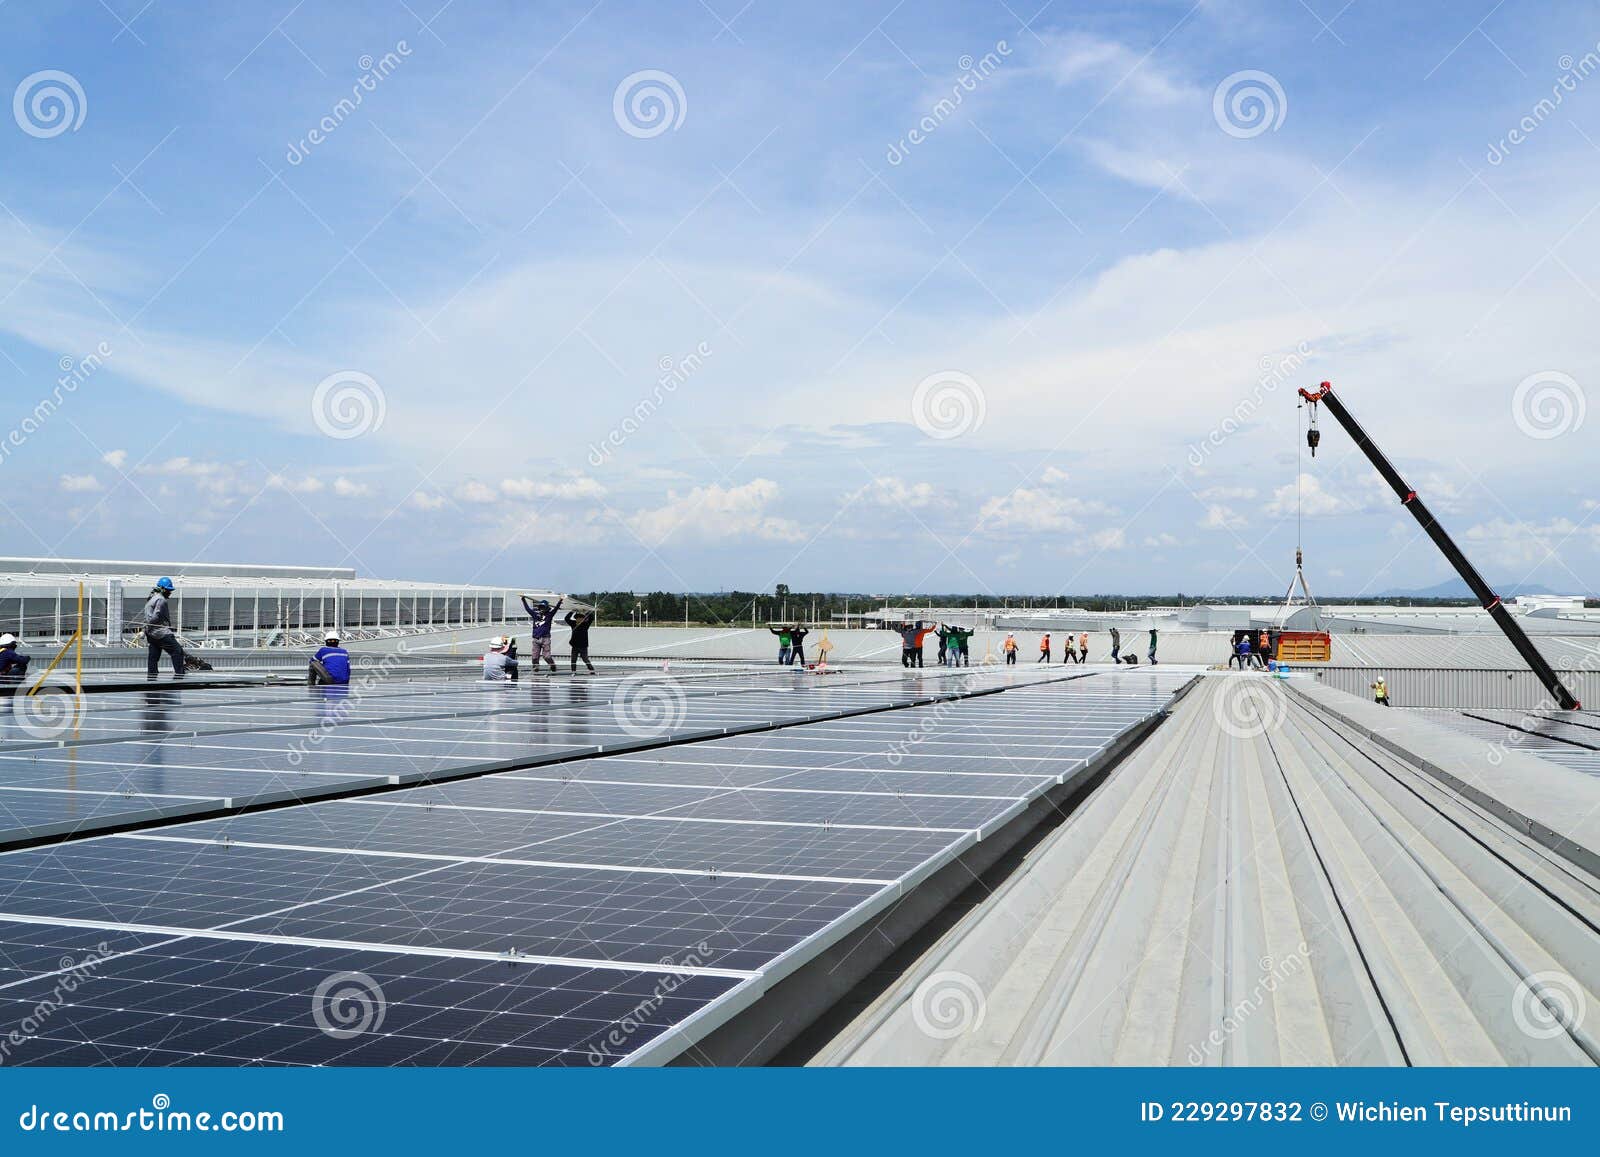 crane uploading solar panels on roof with installation workers